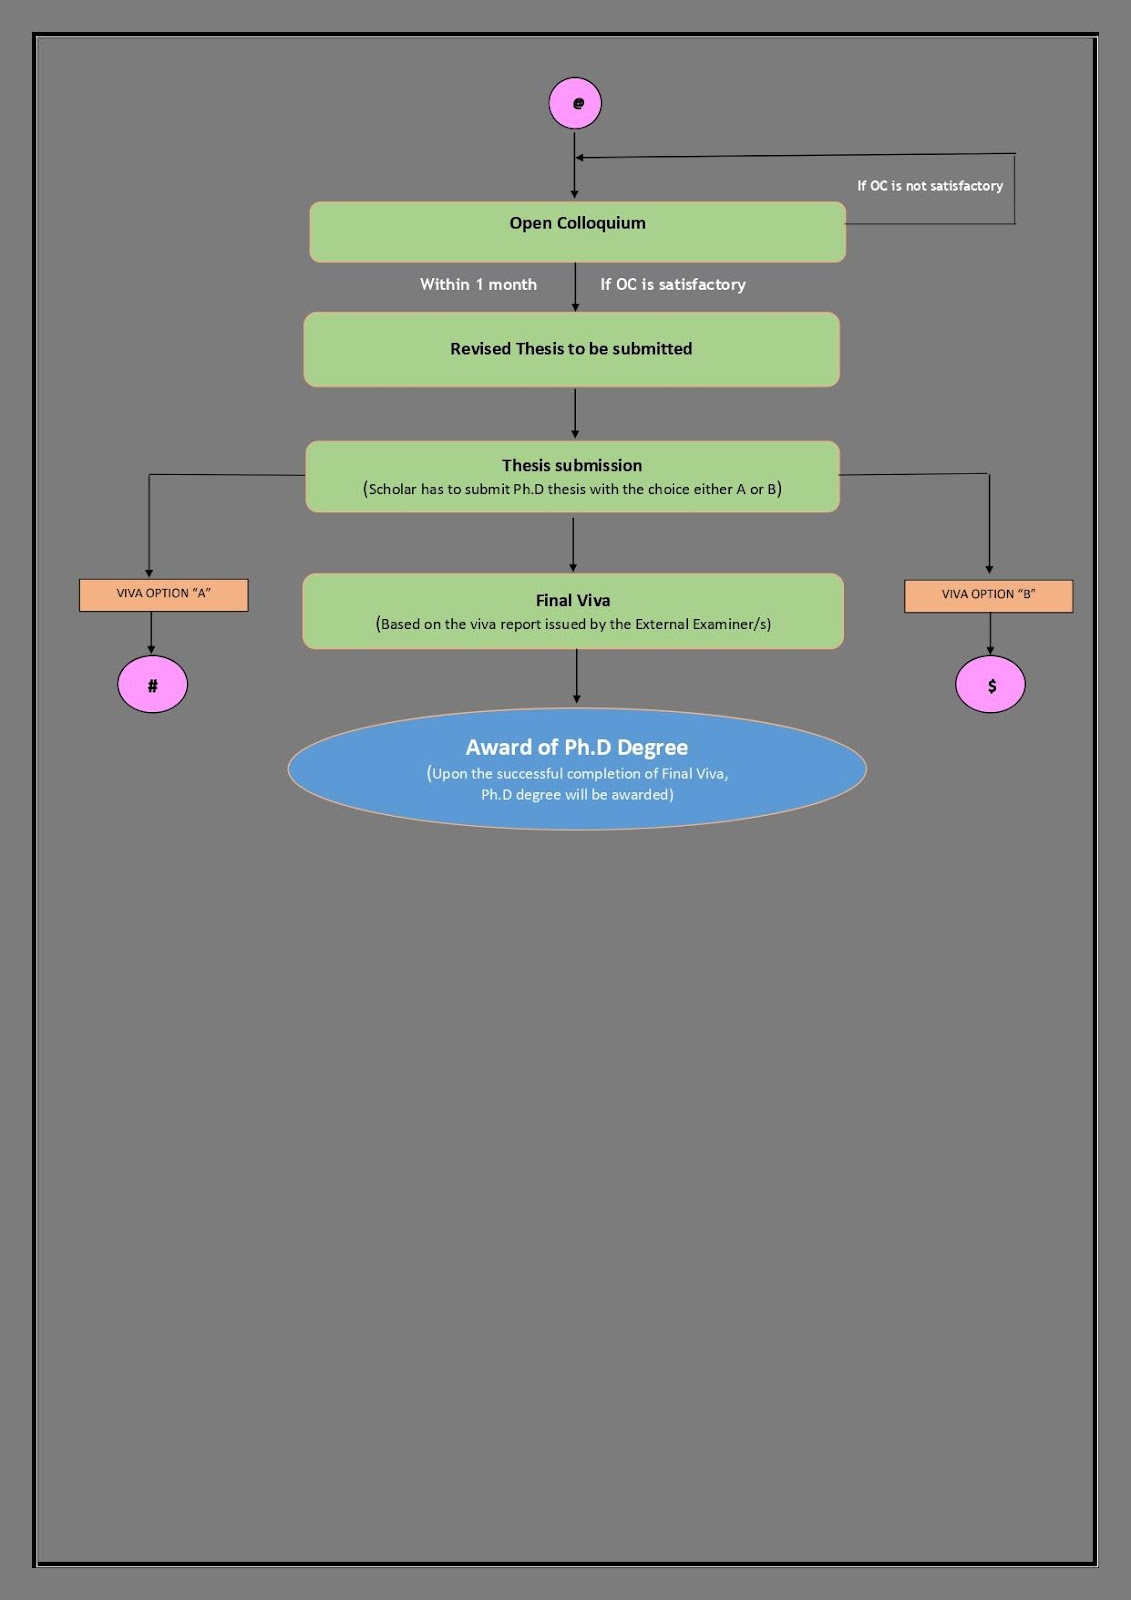 C:\Users\Brook Side\Downloads\ilovepdf_pages-to-jpg\Ph.D flow chart for FAQs_page-0002.jpg